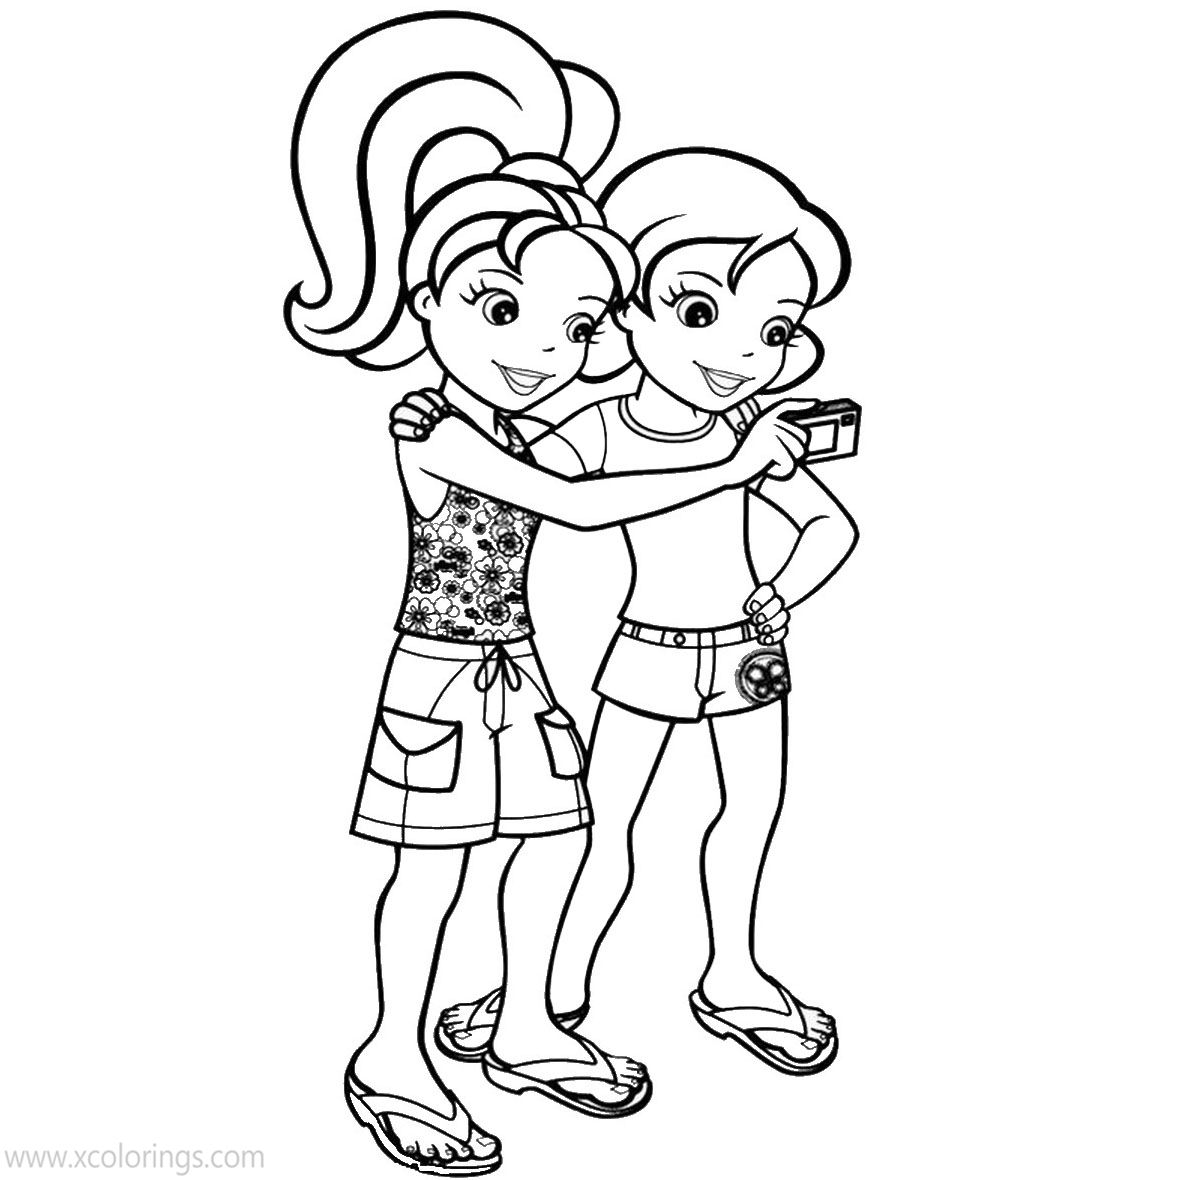 Free Polly Pocket Coloring Pages Taking a Photo printable